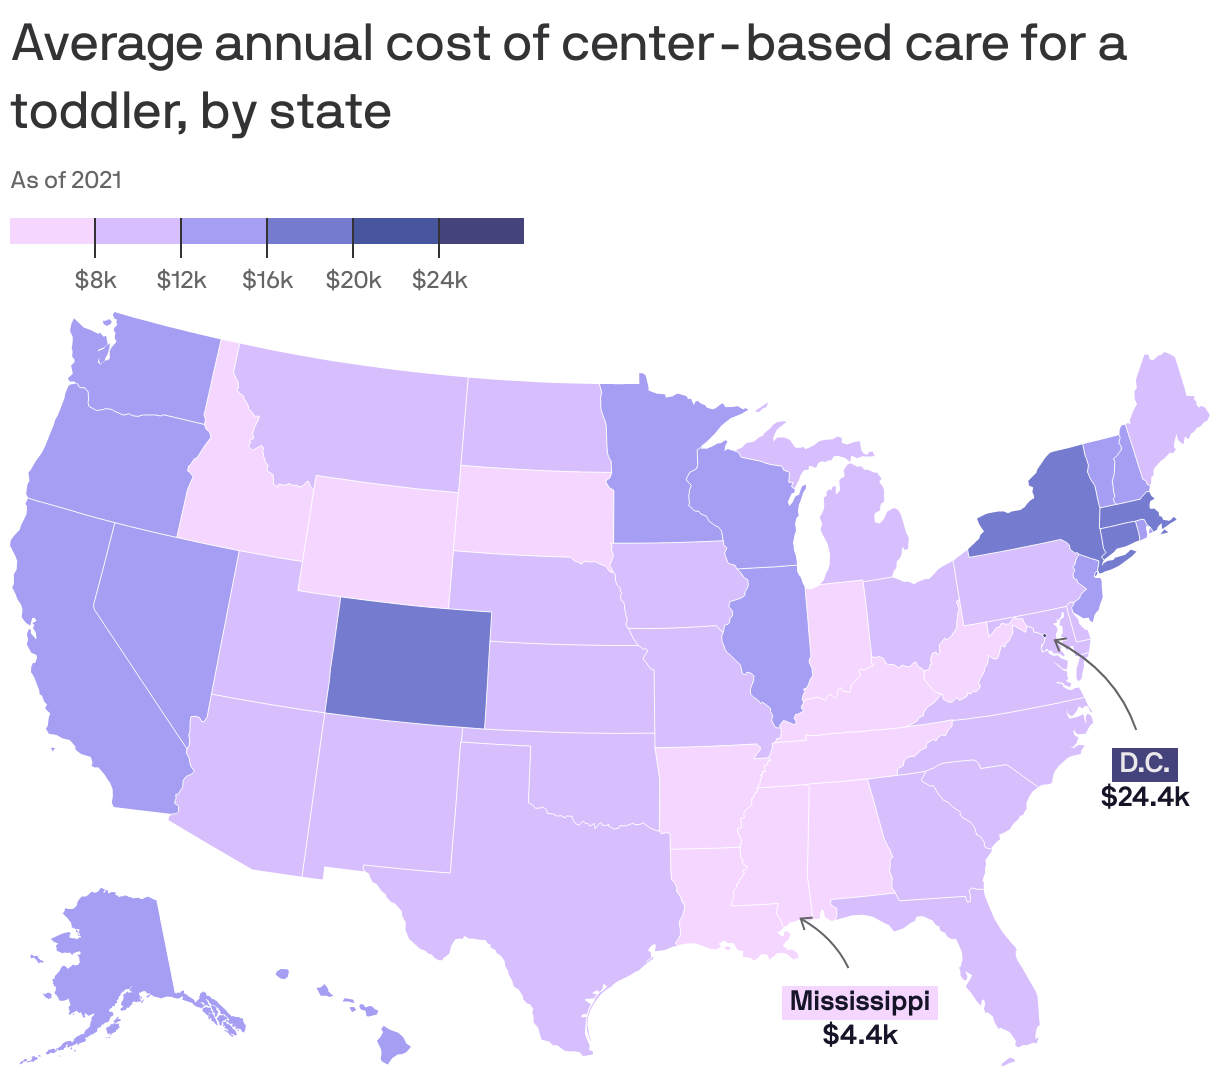 Average annual cost of center-based care for a toddler, by state